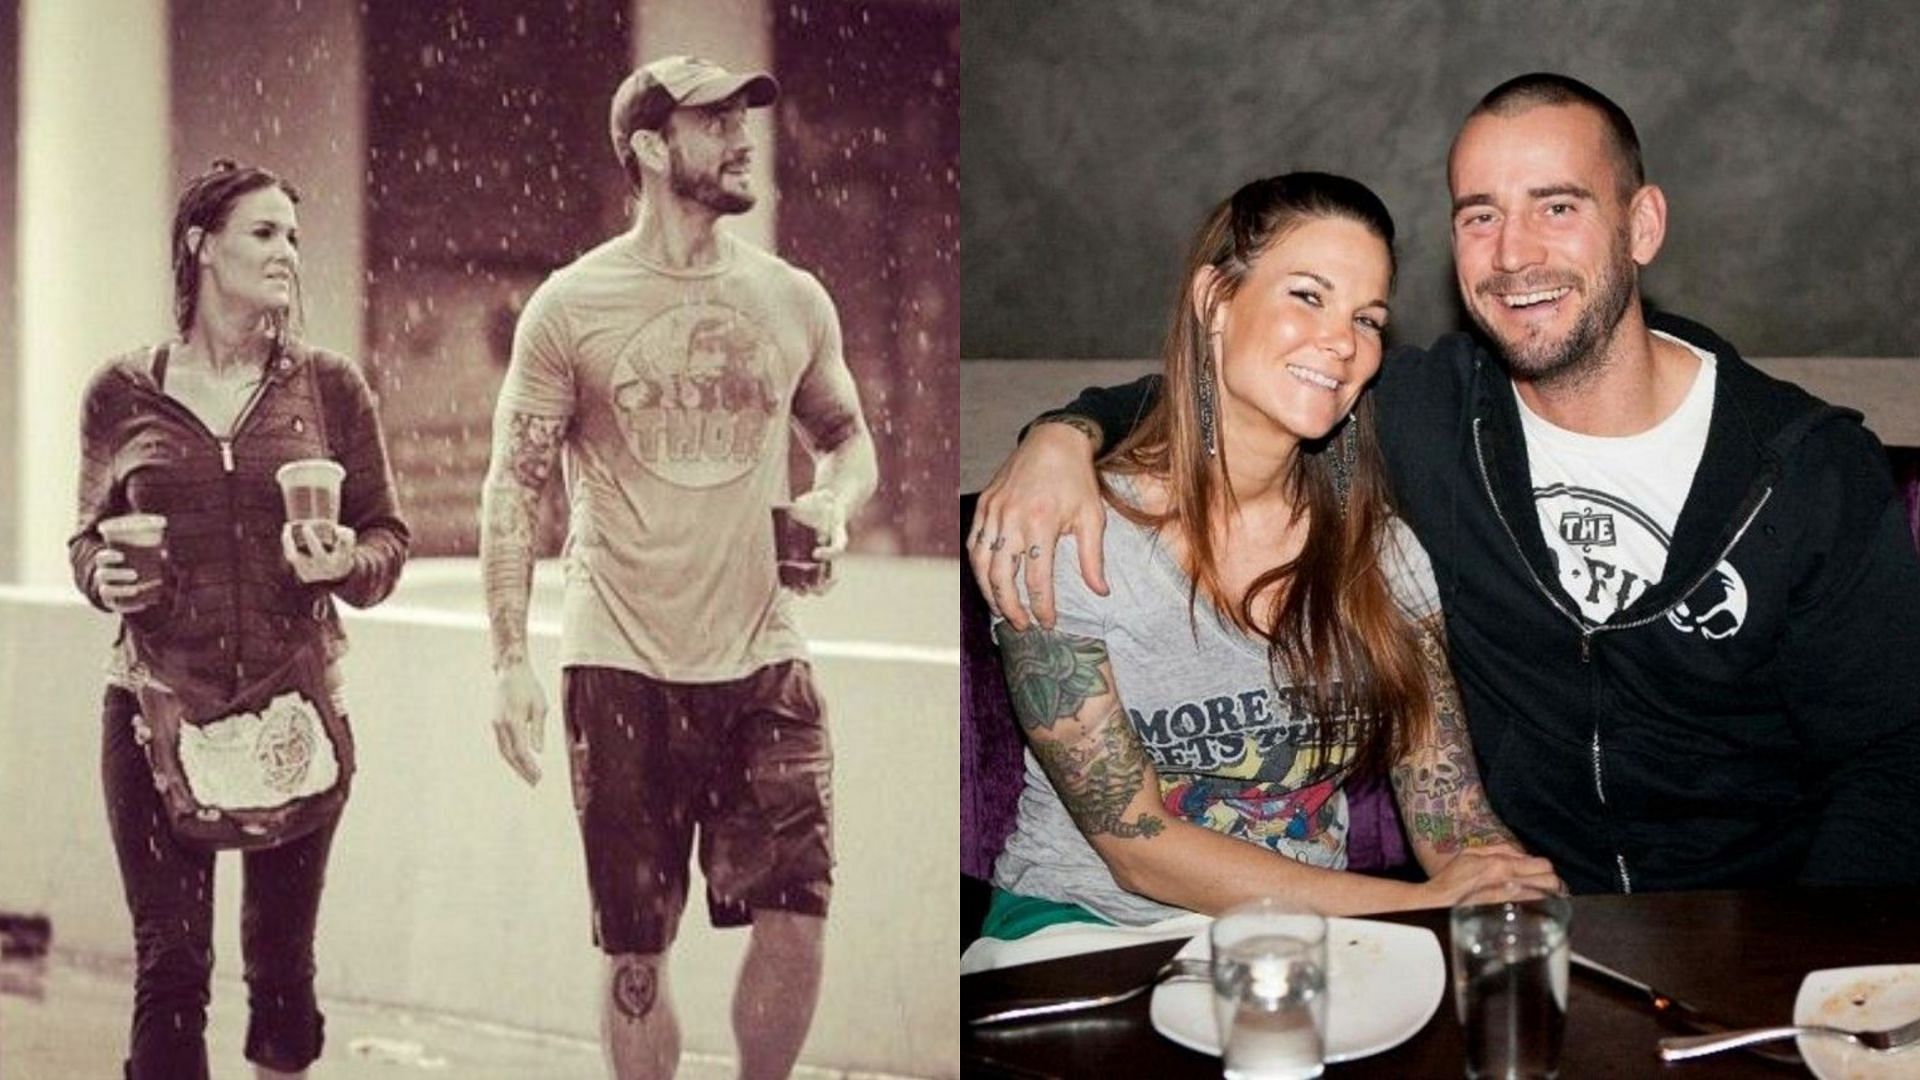 CM Punk and Lita dated on and off between 2009 and 2013